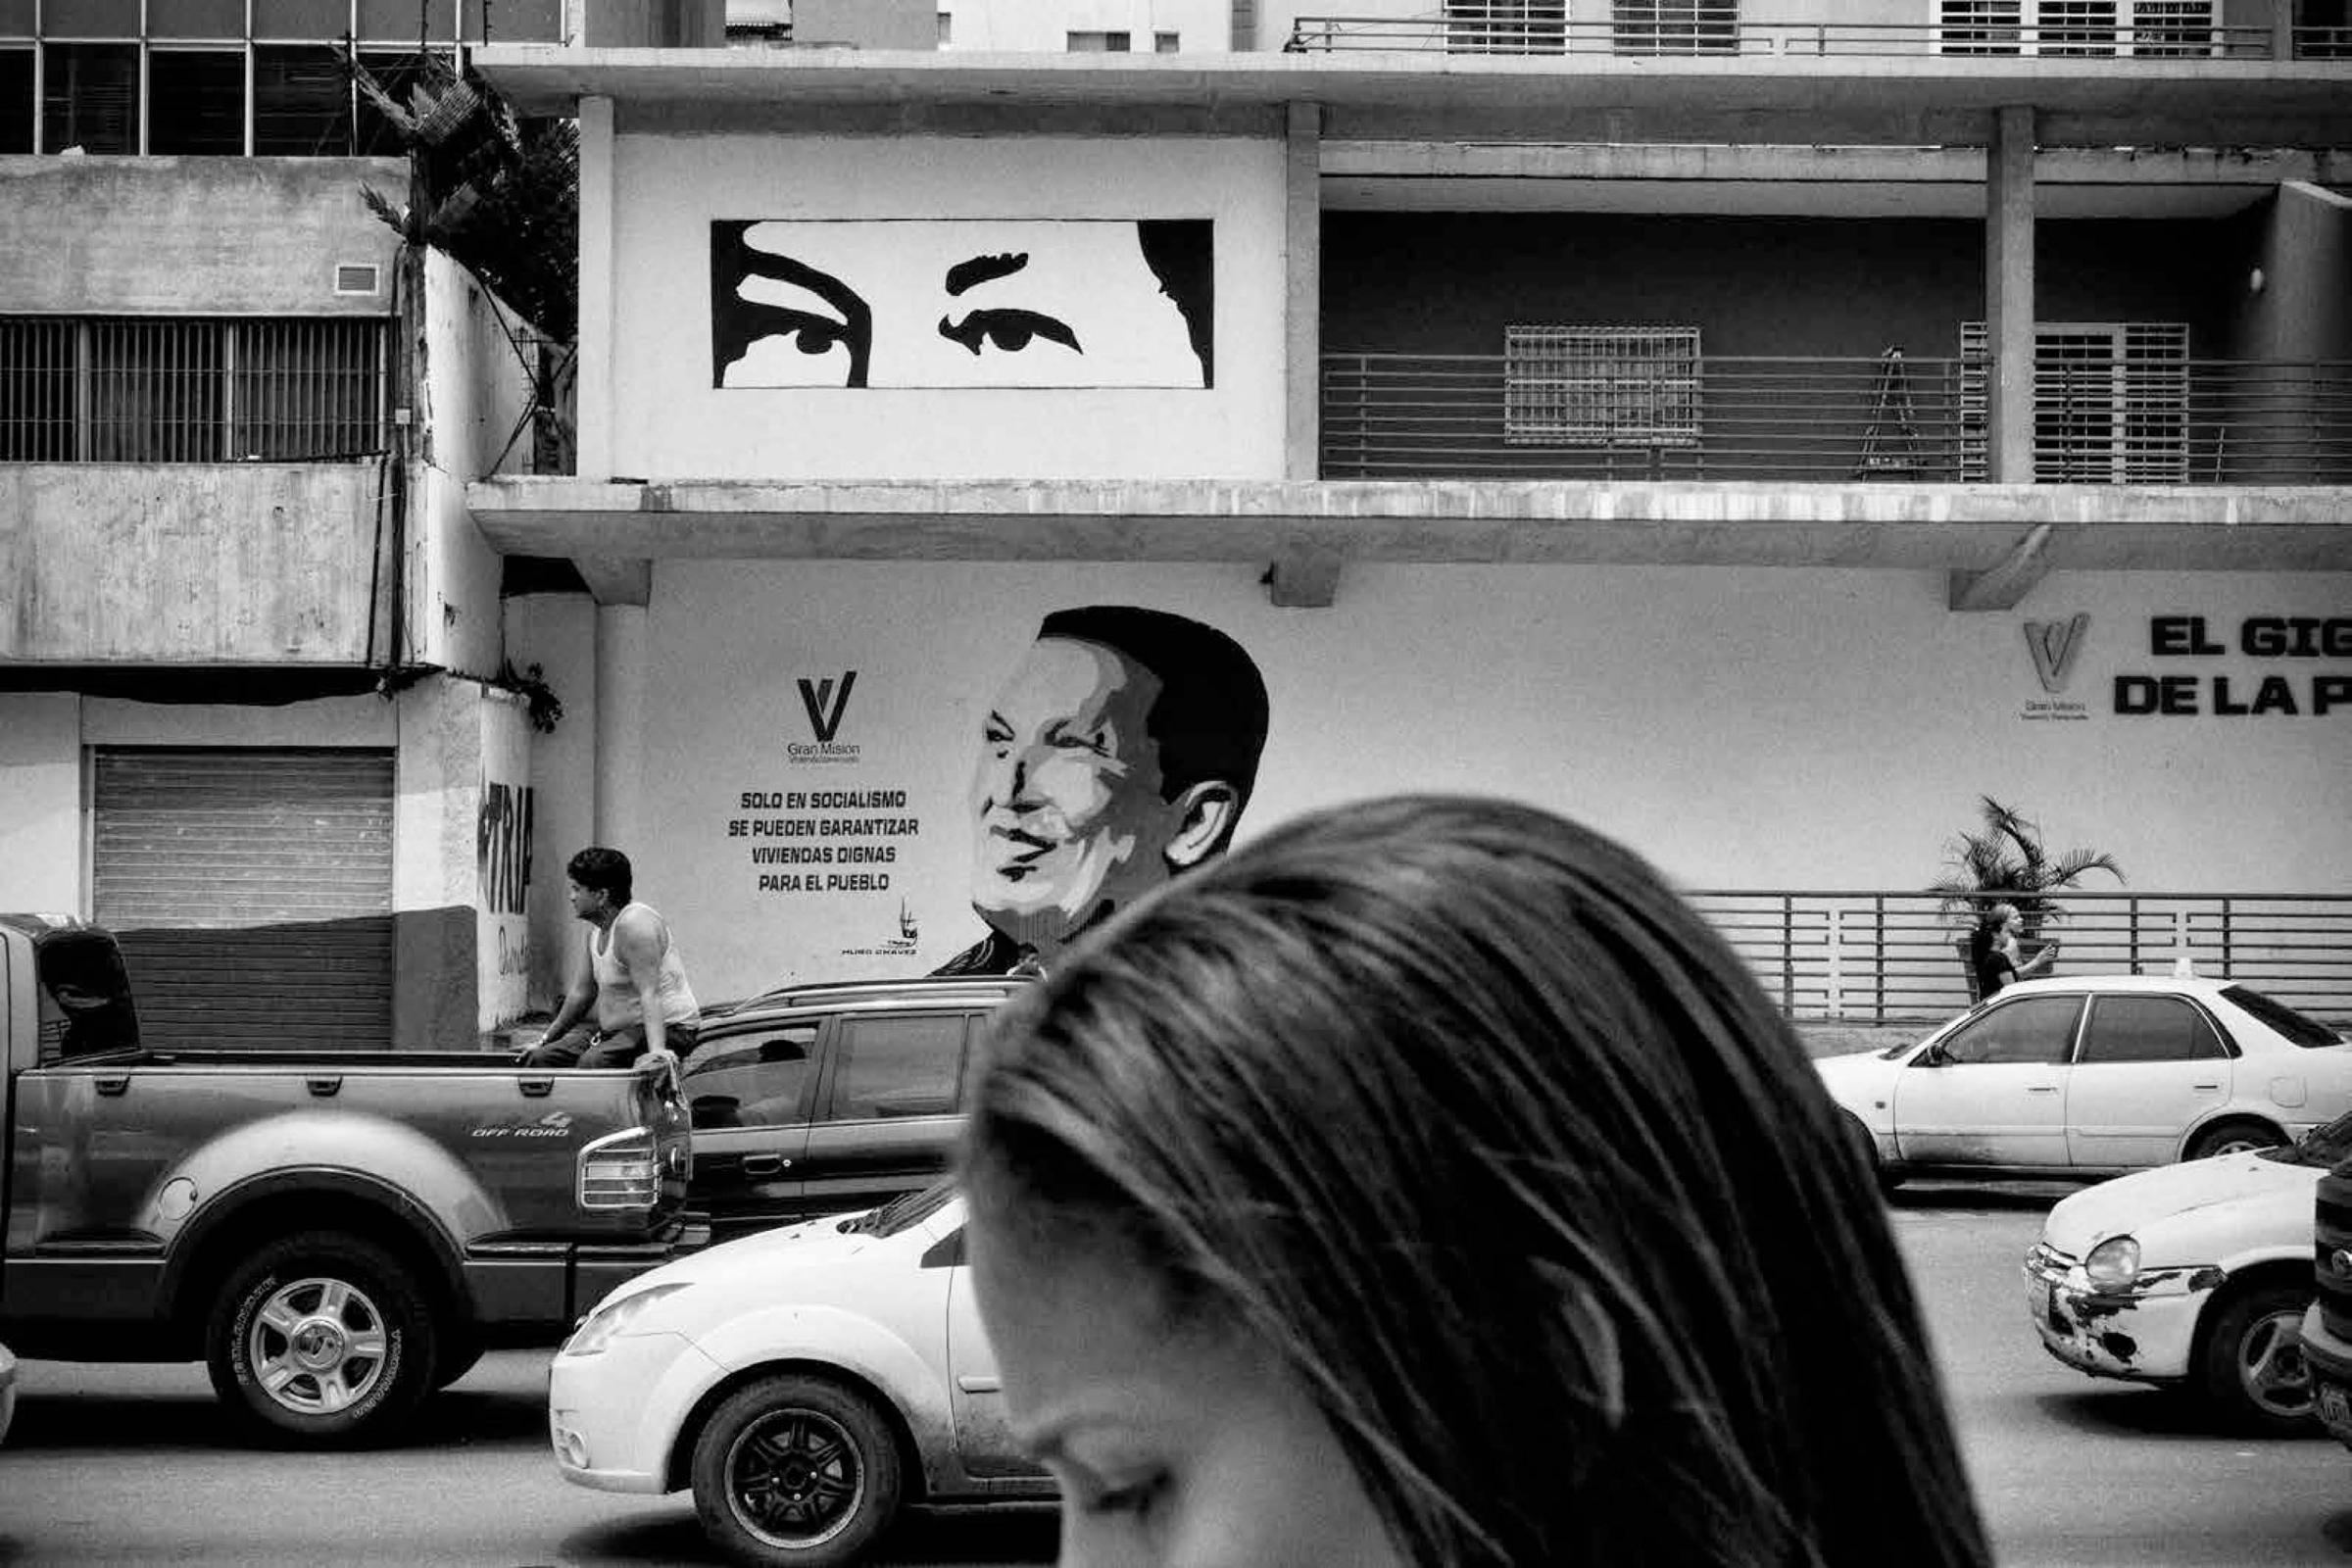 Images of former President Hugo Chavez are still pervasive around Venezuela, along with anti-imperialist and revolutionary propaganda graffiti. For the Venezuelan government, the personality cult surrounding the Bolivarian leader, helps keep the spirit of the revolution alive, Caracas, Venezuela, July 2015.